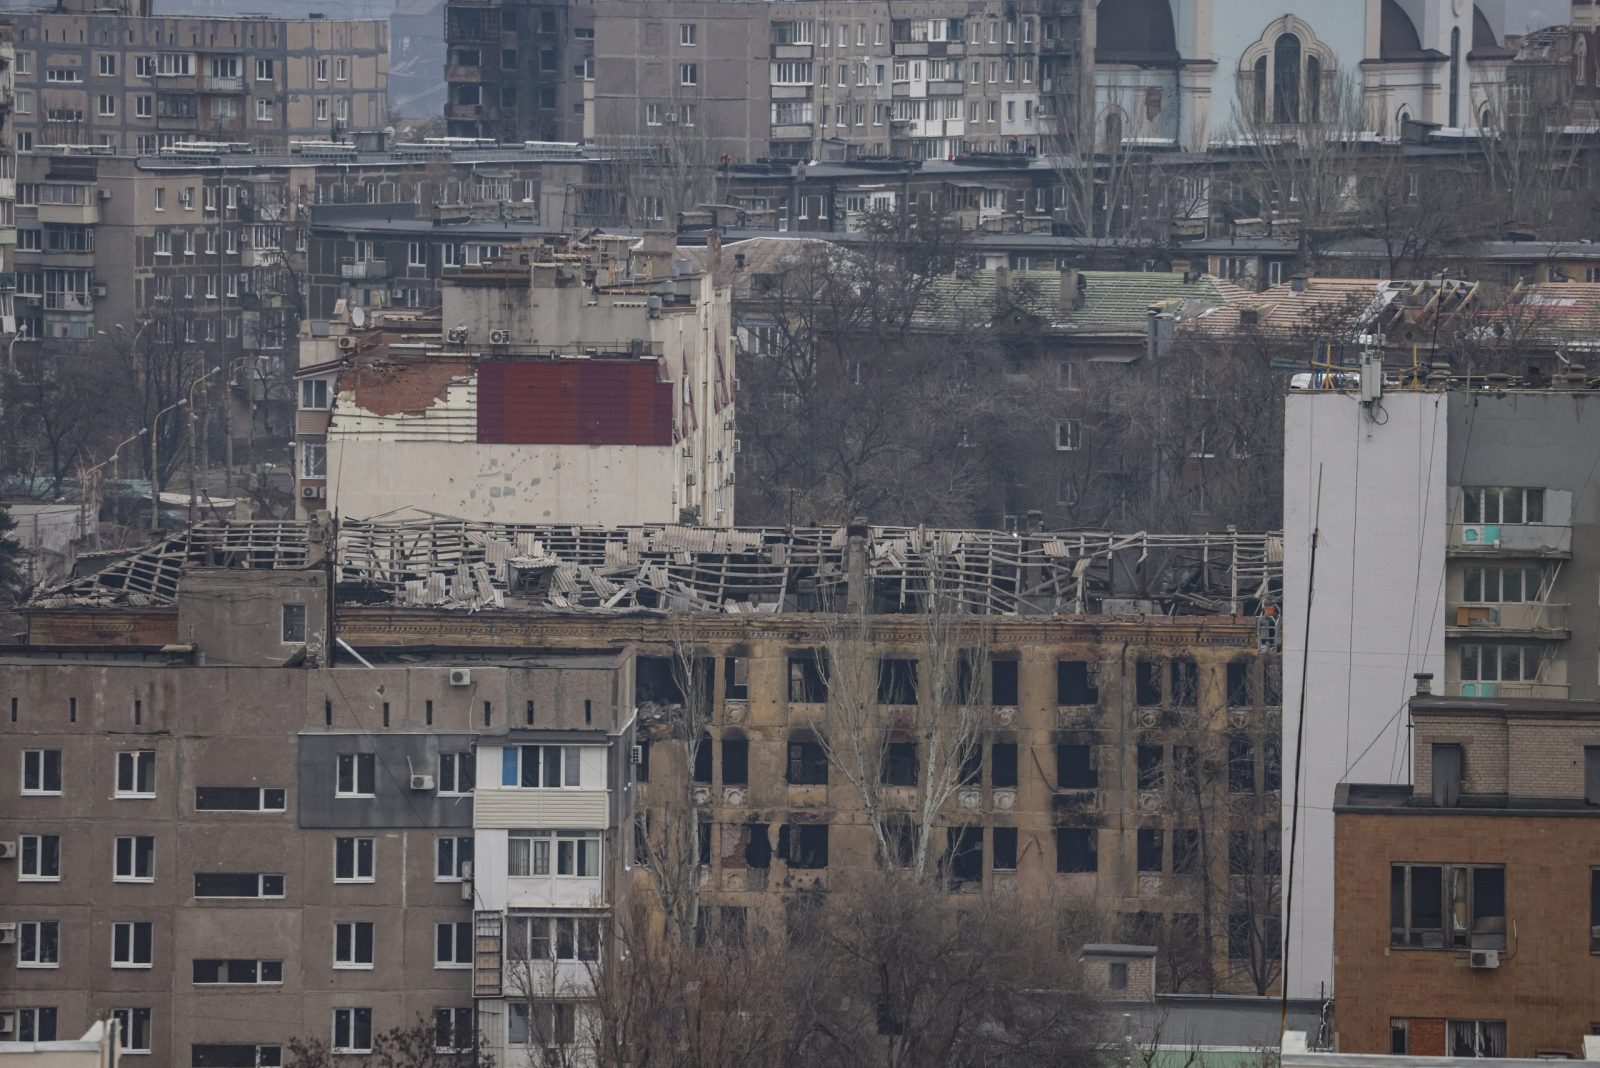 epa10360631 A general view of the buildings in Mariupoll, Ukraine, 10 December 2022 (issued 11 December 2022). An estimate 250,000 inhabitants have left the city, about 300,000 still remain. During the hostilities, up to 70 percent of the housing stock of Mariupol was destroyed and about 5,000 civilians were killed due to fighting and shelling, Konstantin Ivashchenko, the new mayor of the city, said. City authorities prepare residential buildings for winter and change all central heating systems in Mariupol, where by the end of the year at least 1,000 residential buildings, social and cultural facilities will be connected to heat, said Russian Deputy Prime Minister Marat Khusnullin. The government of the self-proclaimed Donetsk People's Republic (DPR) reported that 129,000 square meters of new housing will appear next year in Mariupol. More than 5,000 builders are working on the restoration of the city. Mariupol is expected to be completely rebuilt in three years.  EPA/SERGEI ILNITSKY